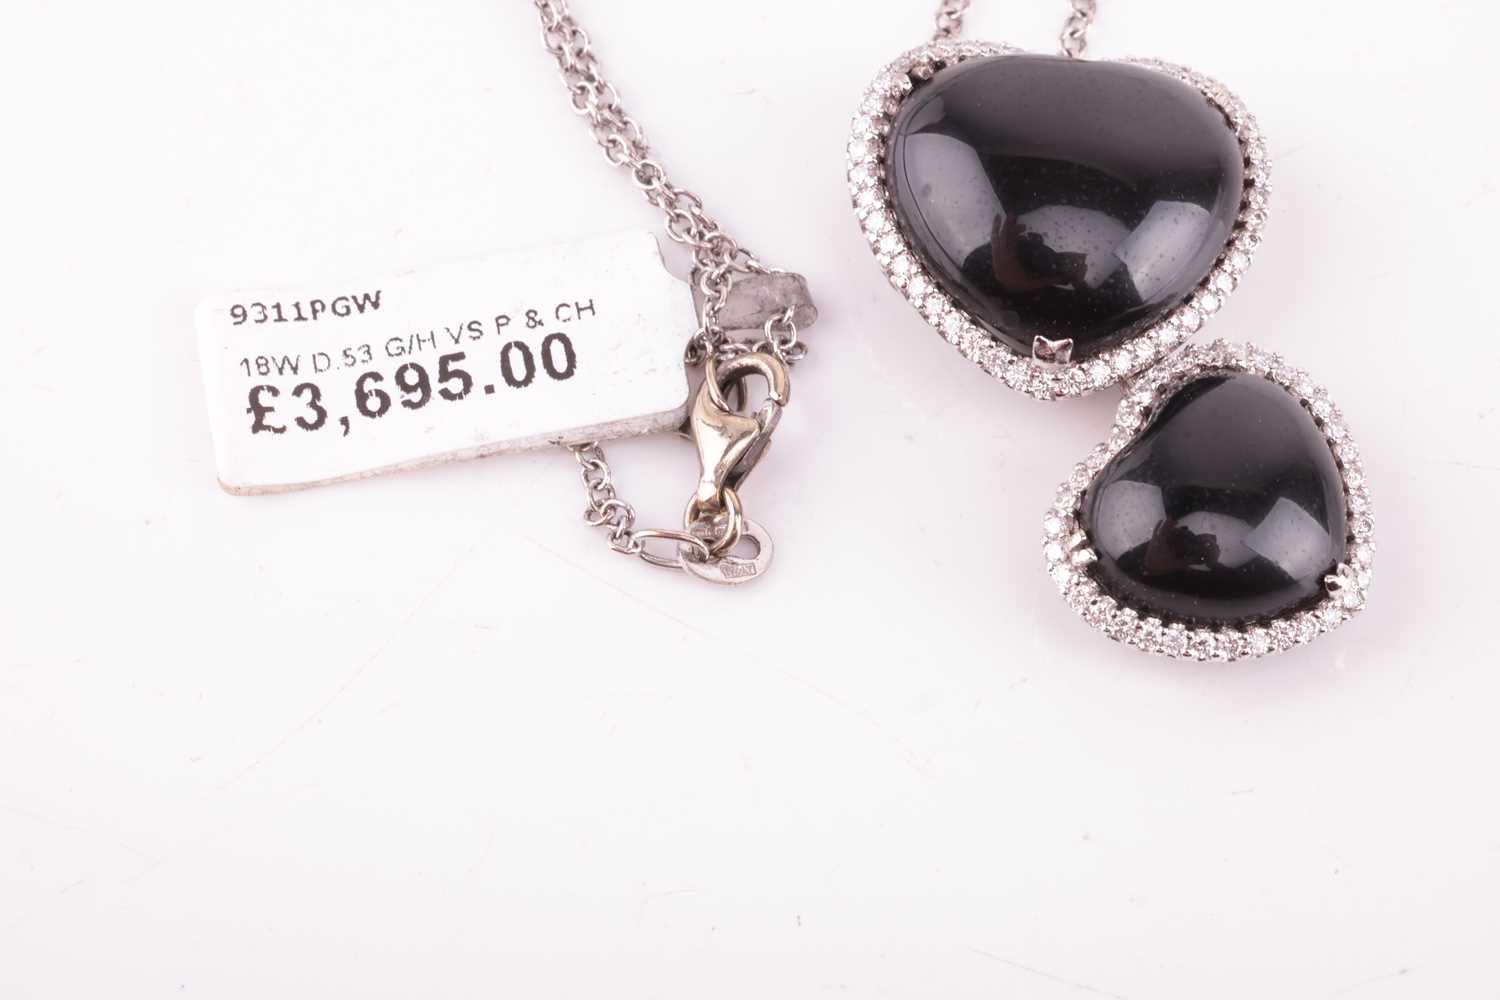 A Whitby jet and diamond double heart pendant on chain, featuring two heart-shaped jet cabochons, fr - Image 3 of 3